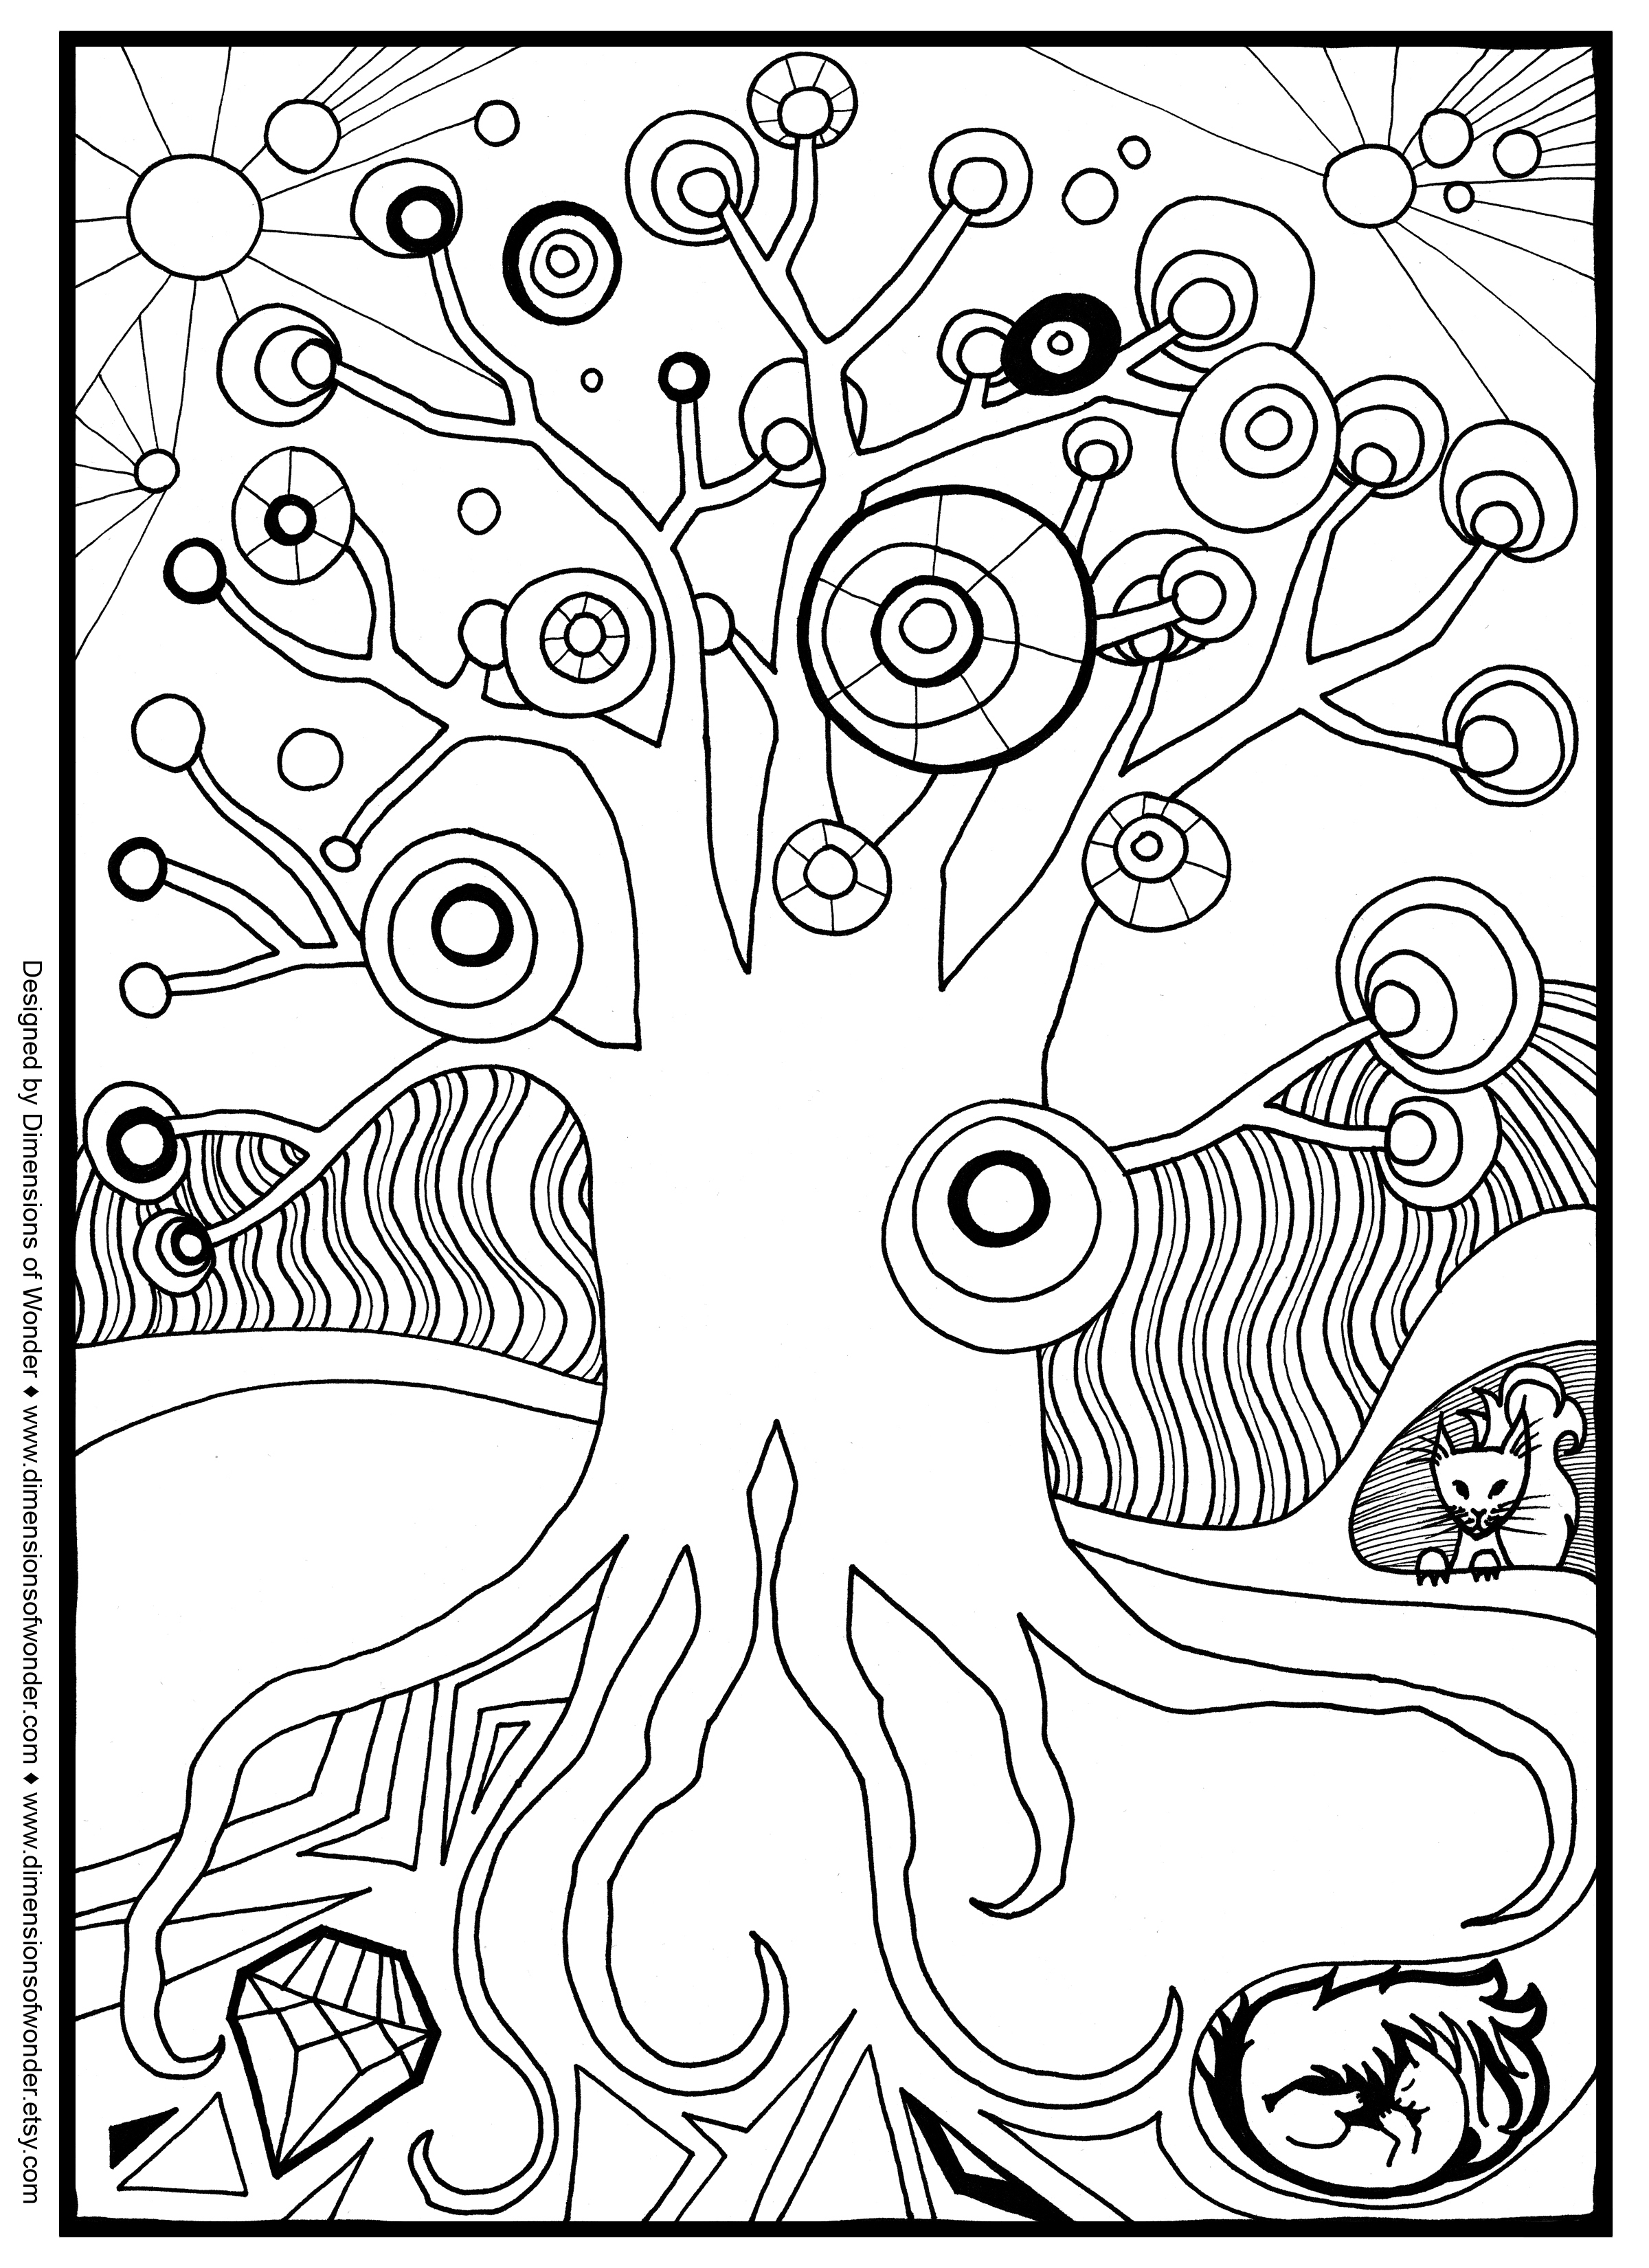 Snow Scene Coloring Page at GetColorings.com | Free printable colorings